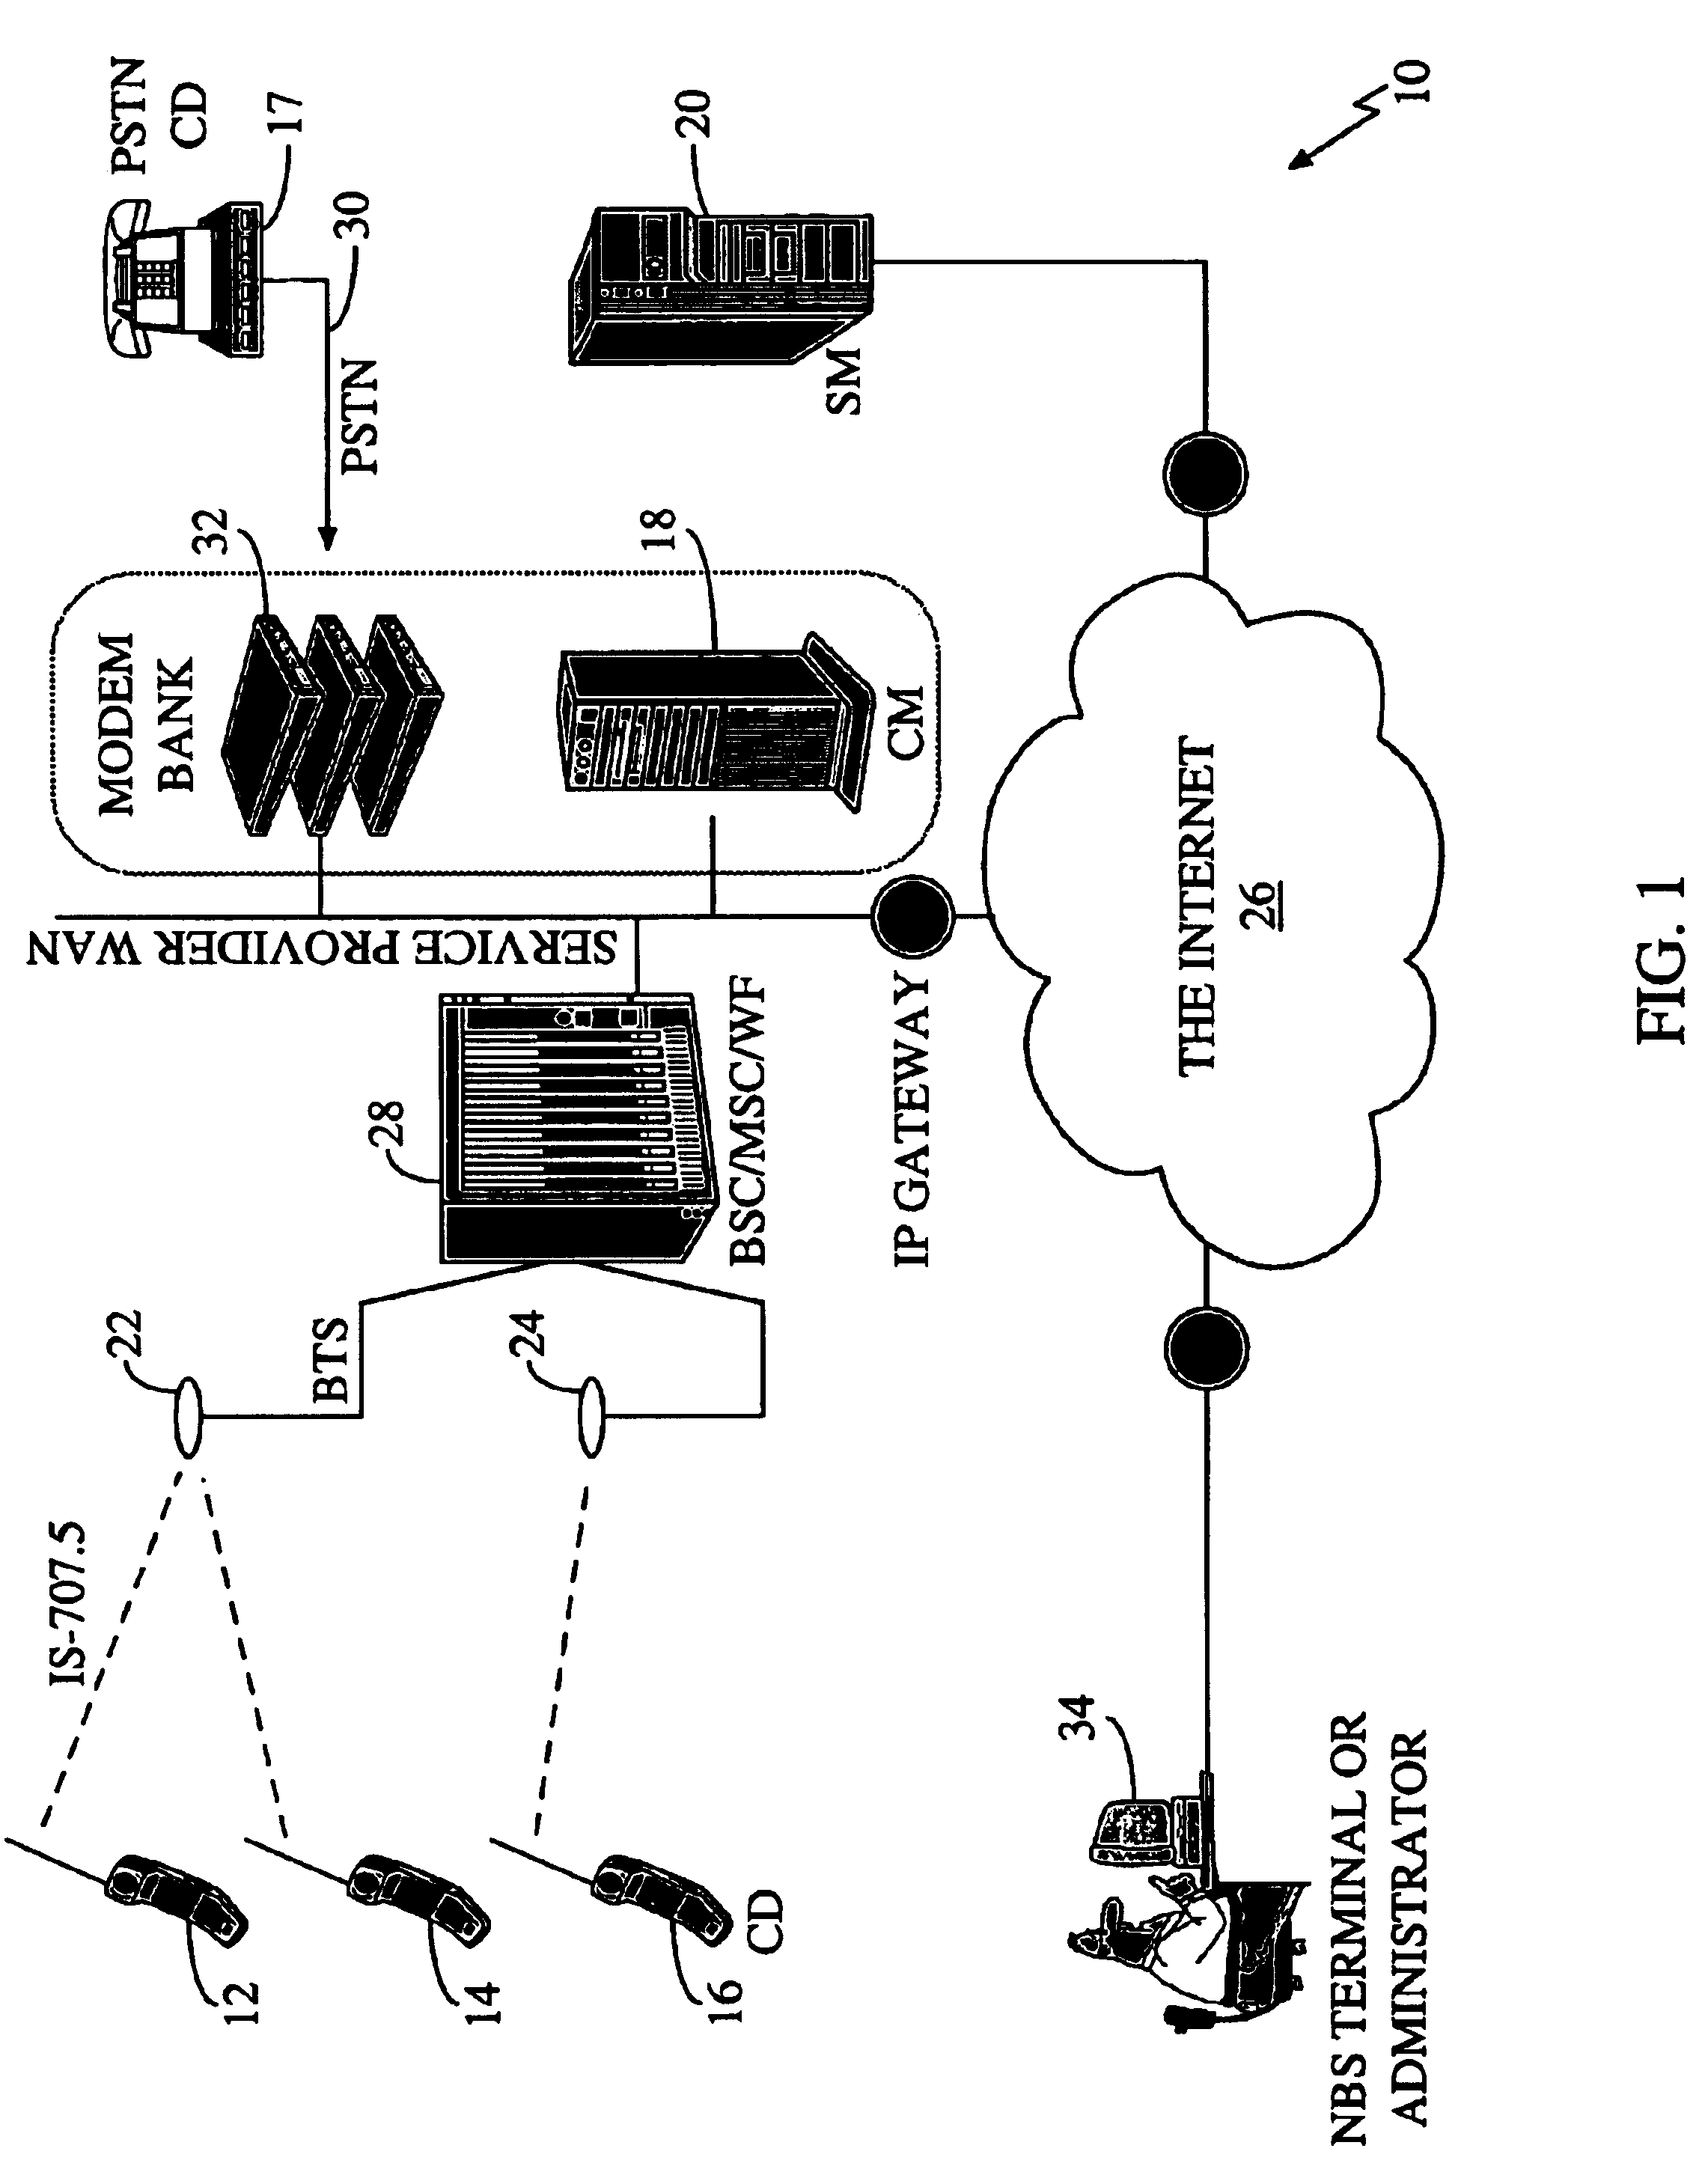 Method and apparatus for enabling group communication services in an existing communication system